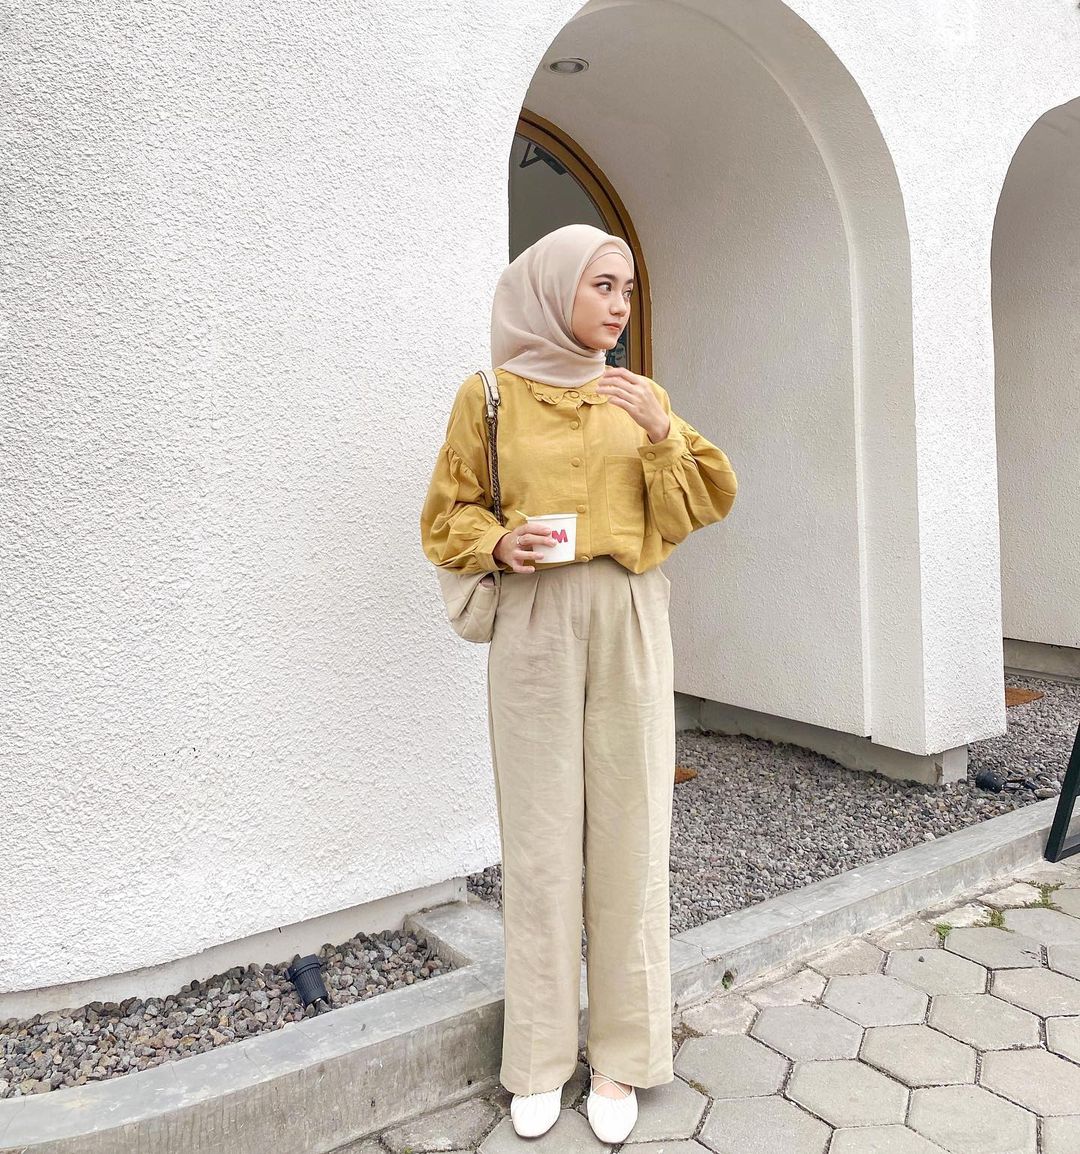 “Summer Vibes” Hijab Outfit Ideas Will Brighten Your Day!